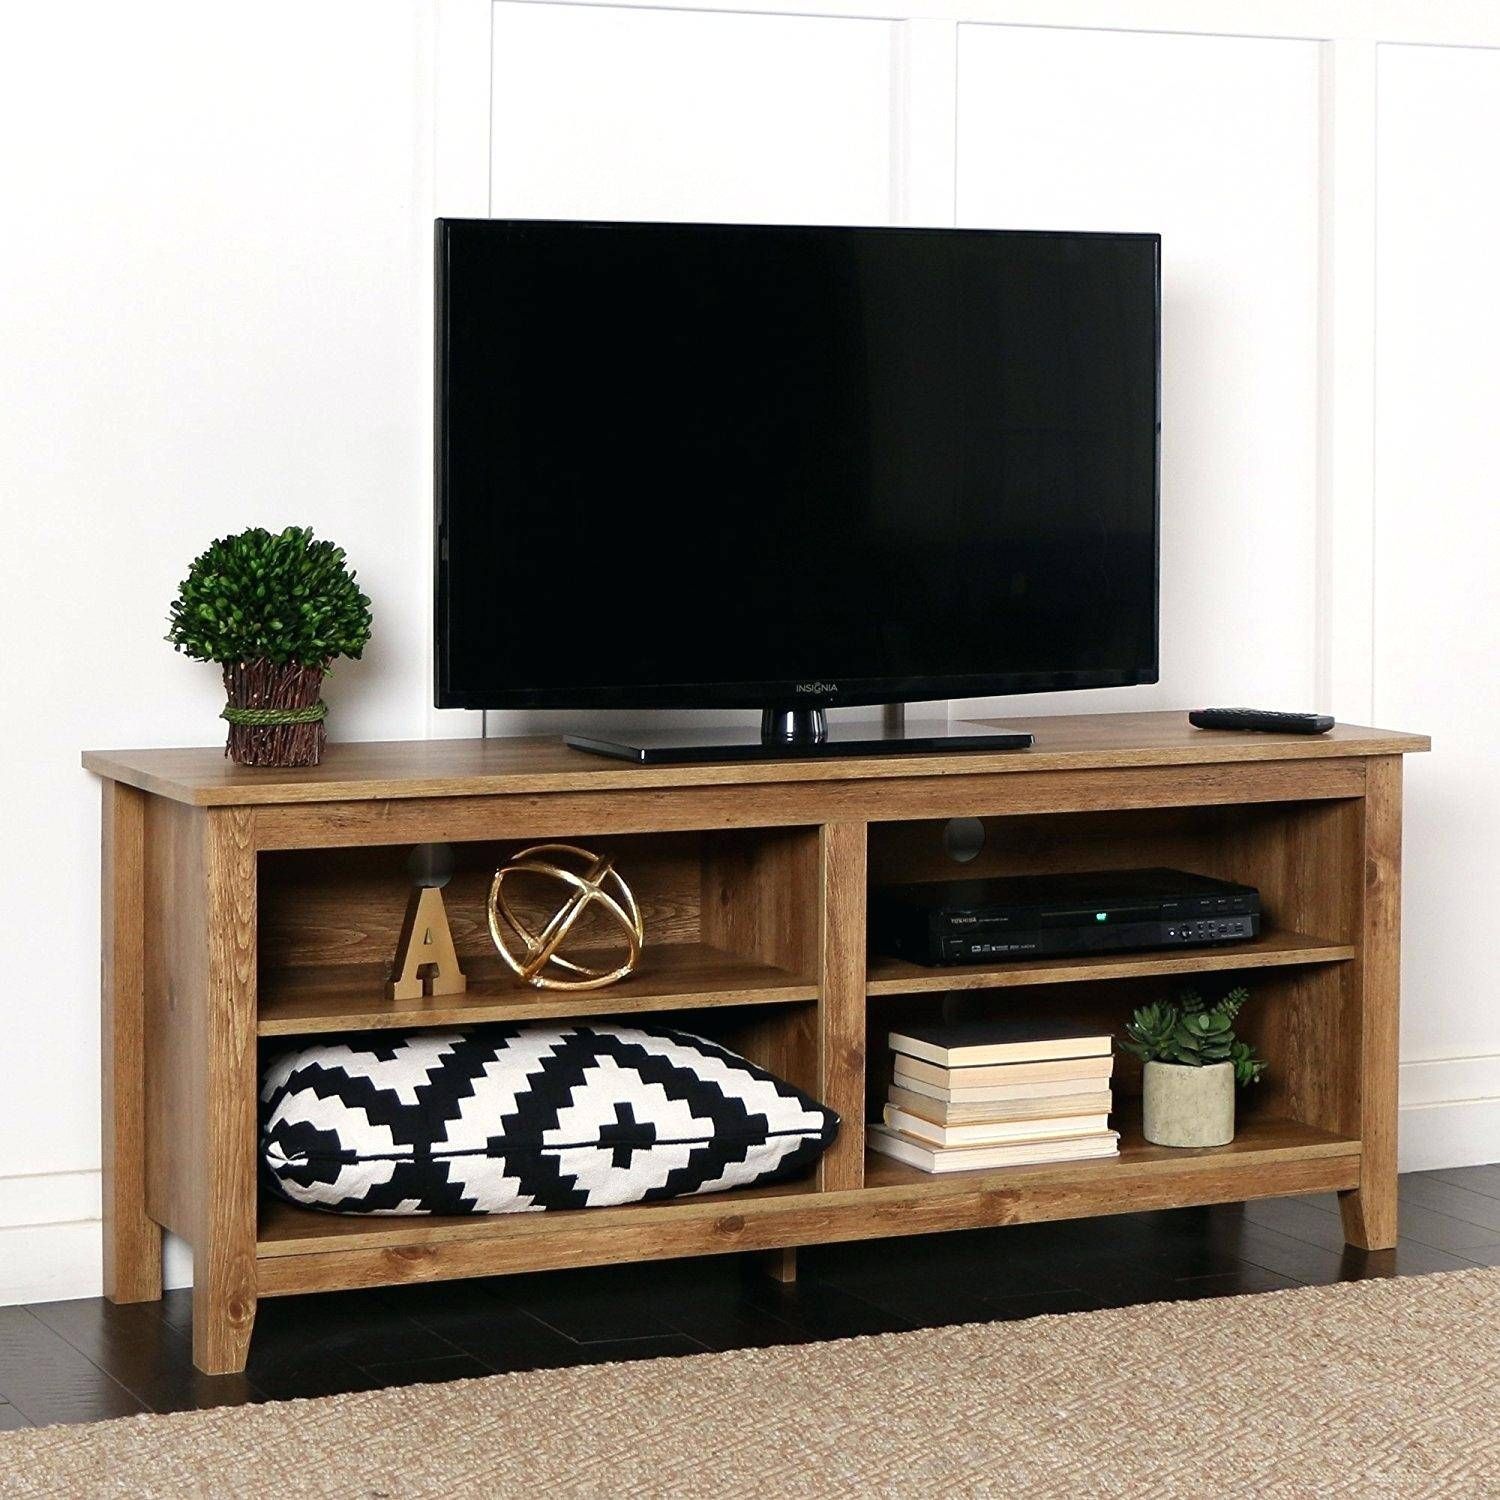 Tv Stand : Outstanding Sony X850c Design Picture 12 Tv Stand Throughout Tv Stands 40 Inches Wide (View 2 of 15)